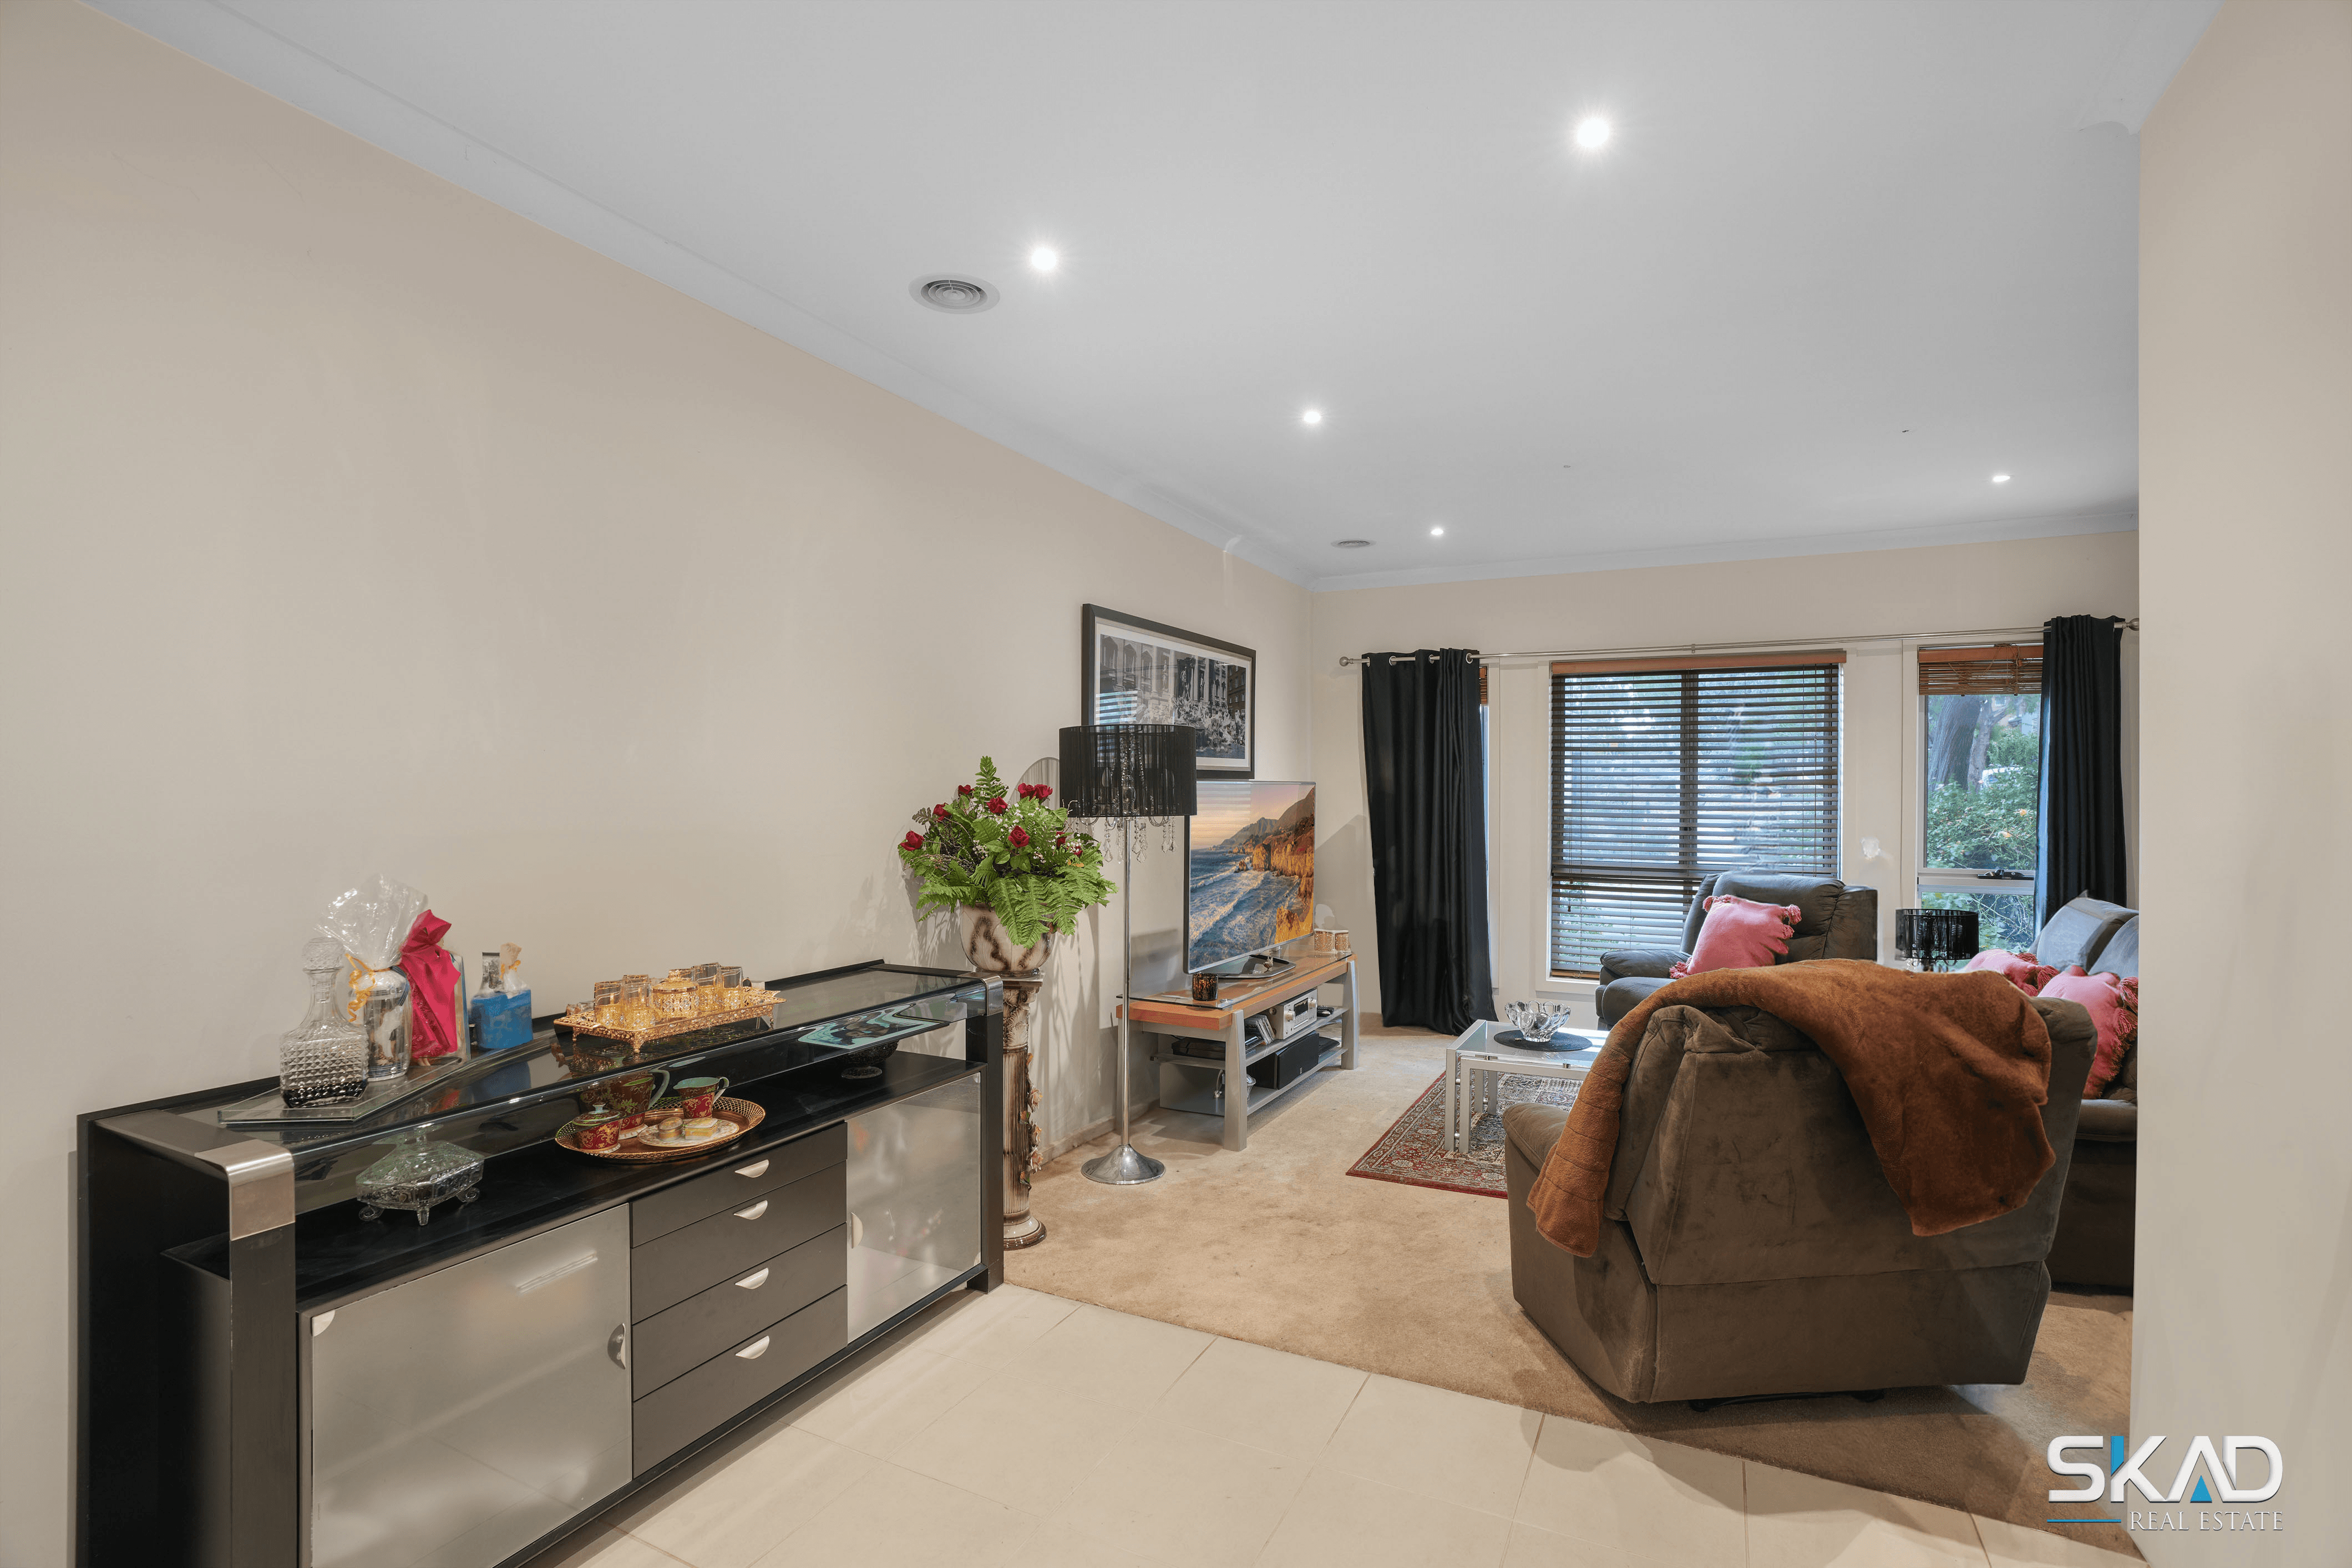 24 Waterlily Drive, EPPING, VIC 3076